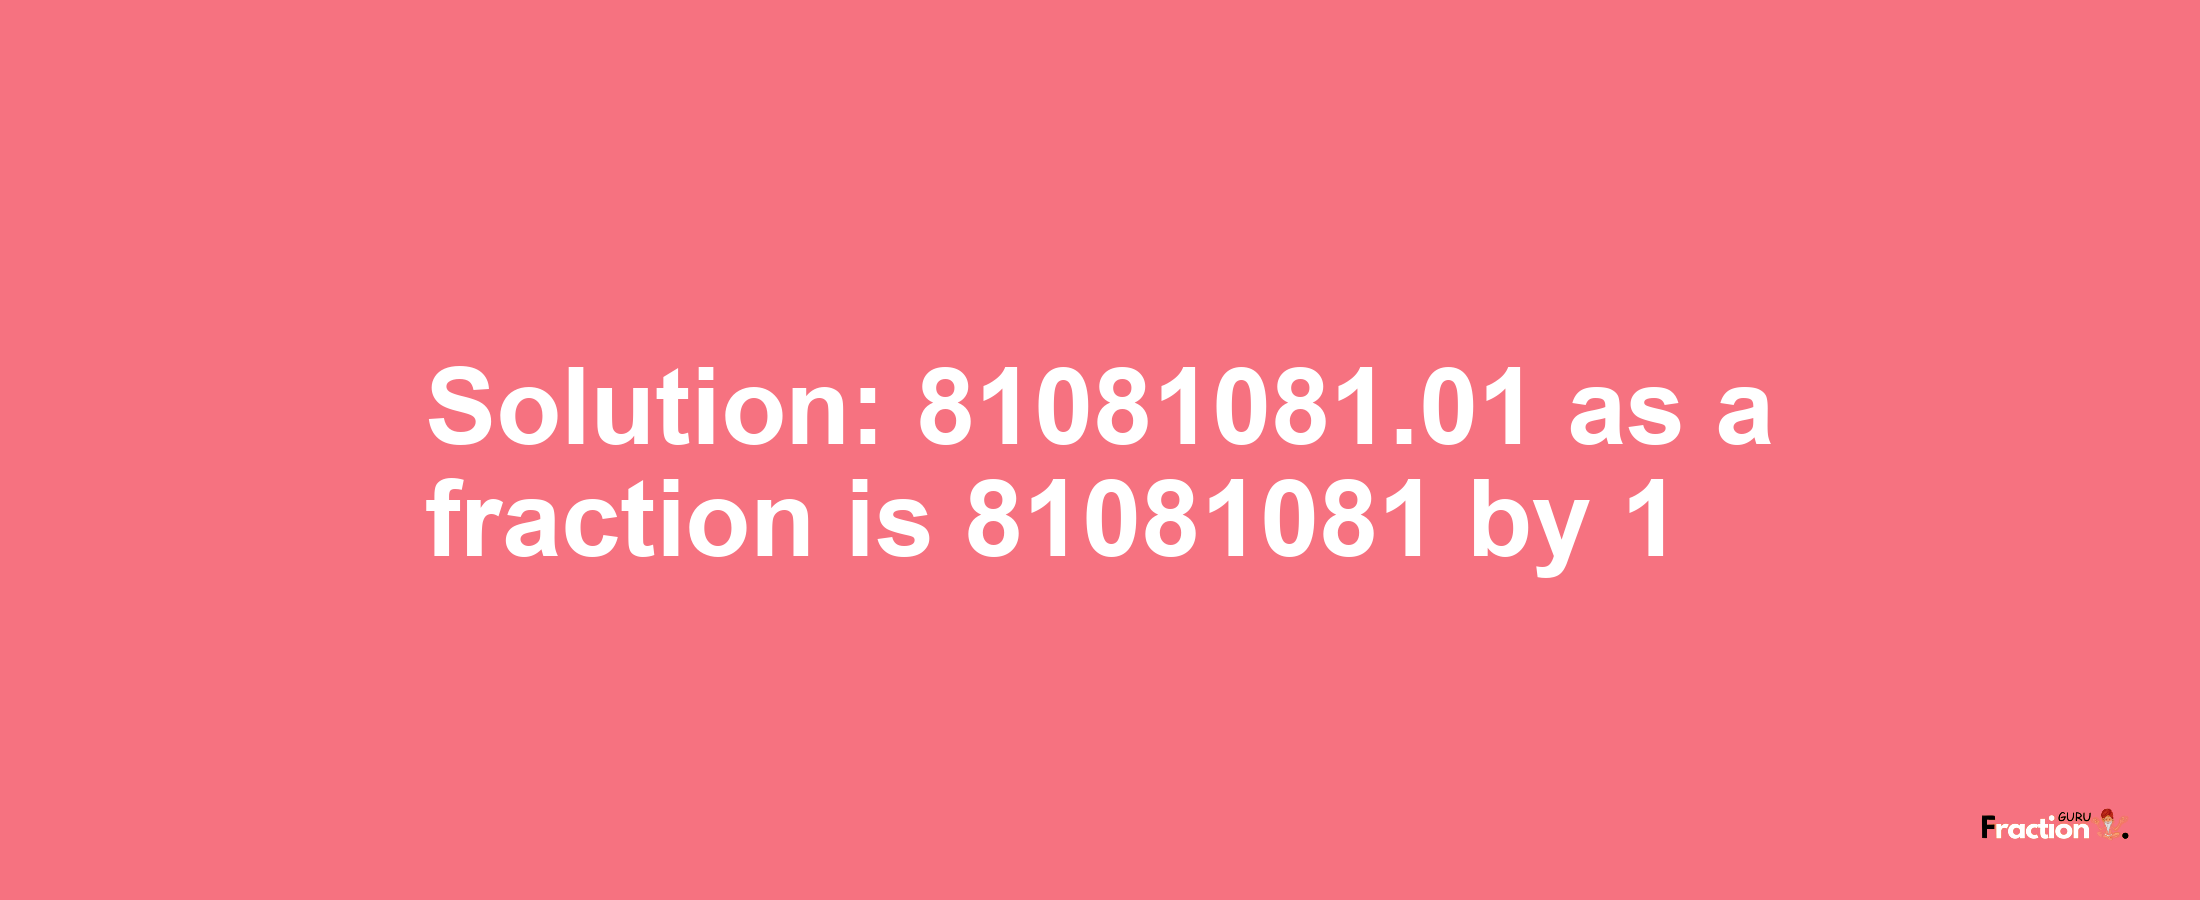 Solution:81081081.01 as a fraction is 81081081/1